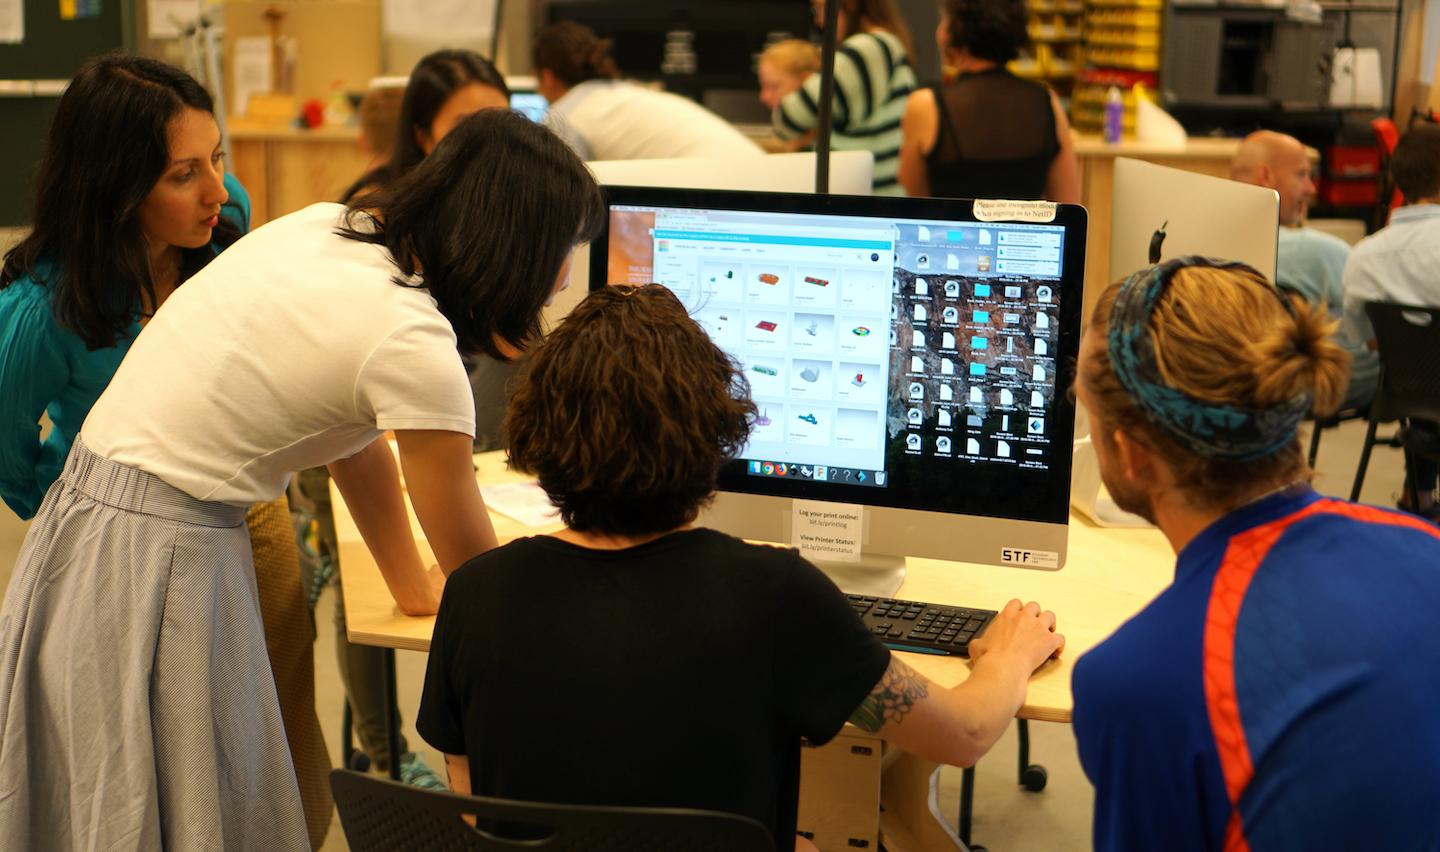 Students gathered around a computer in a classroom